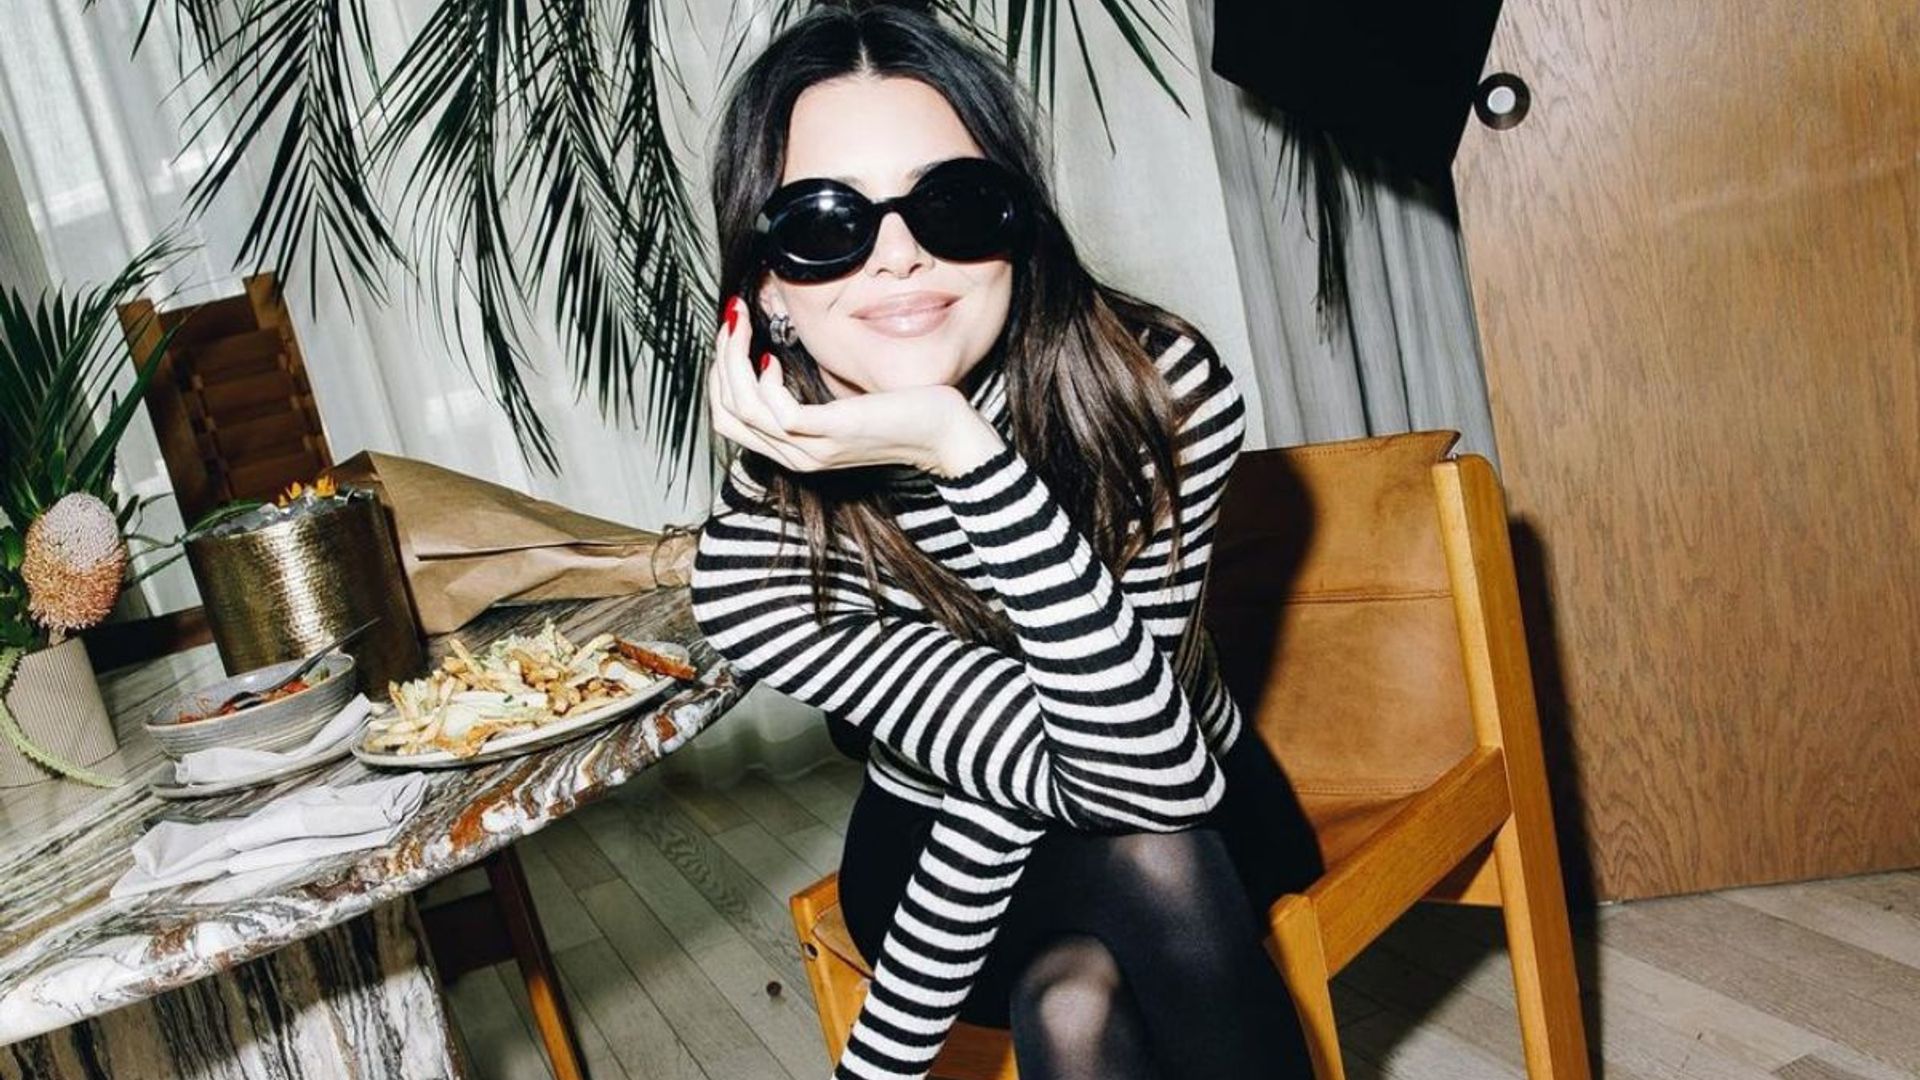 Kendall Jenner Just Made This Throwback Purse Cool Again